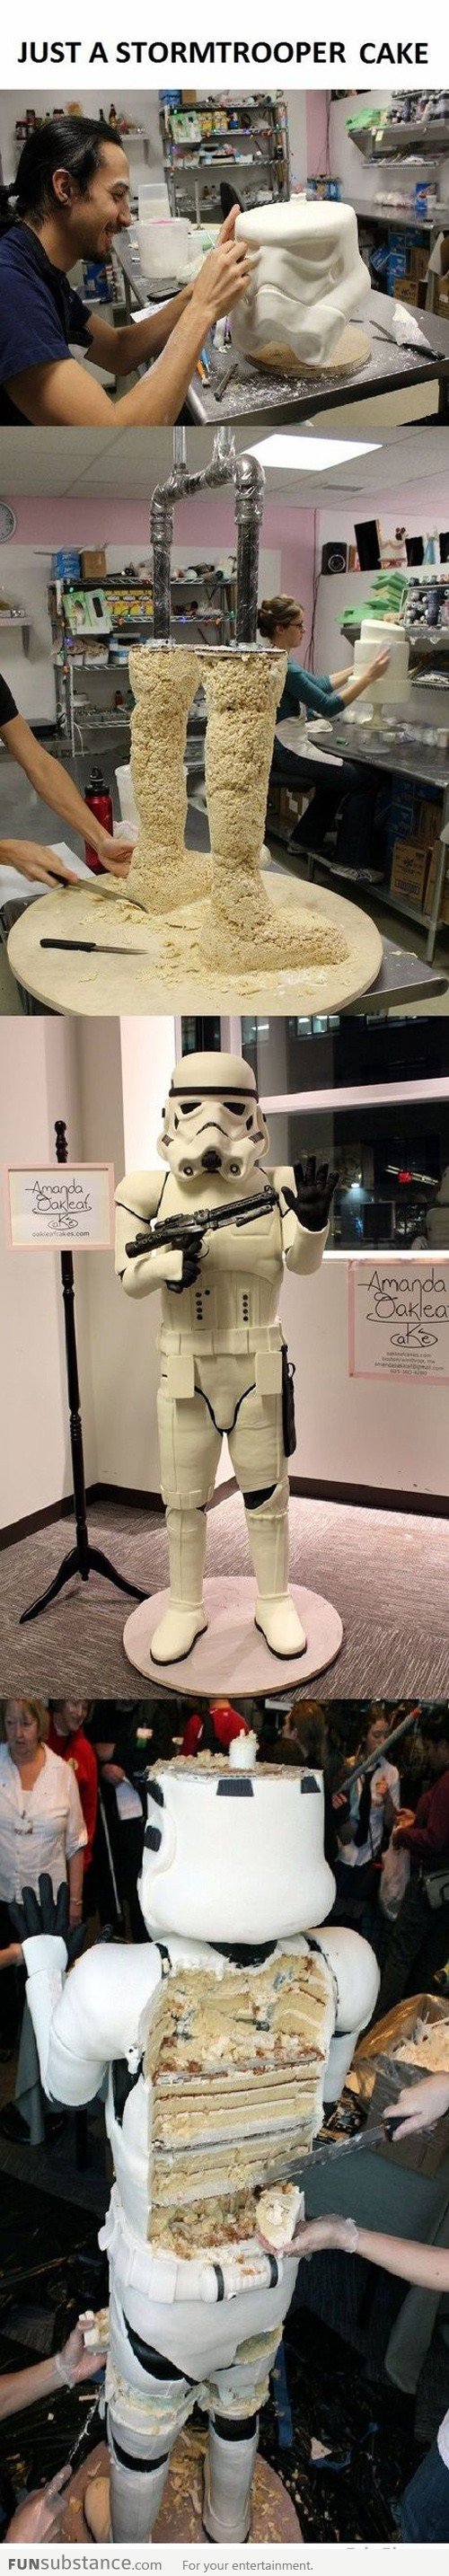 Stormtrooper Cake Wins The Internets.